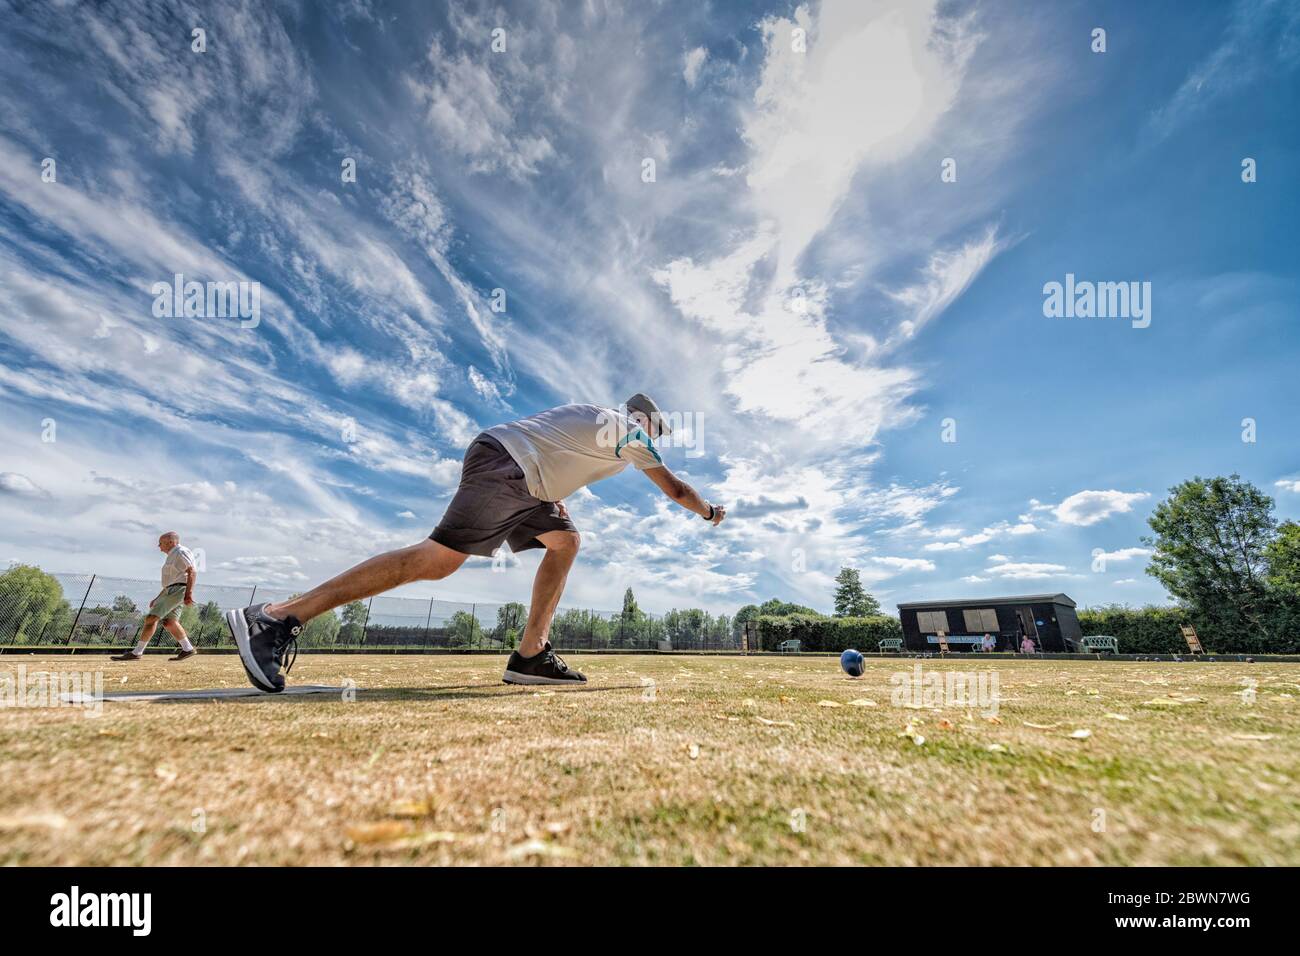 Willingham Cambridgeshire, UK. 2nd June, 2020. Members of the Willingham Bowls Club take part in a roll up on the local green as lockdown from the Covid 19 quarantine is lifted and rules allow the start of some outdoor sports. Competitive matches are still not allowed as lanes are left unoccupied to allow for social distancing. Credit: Julian Eales/Alamy Live News Stock Photo